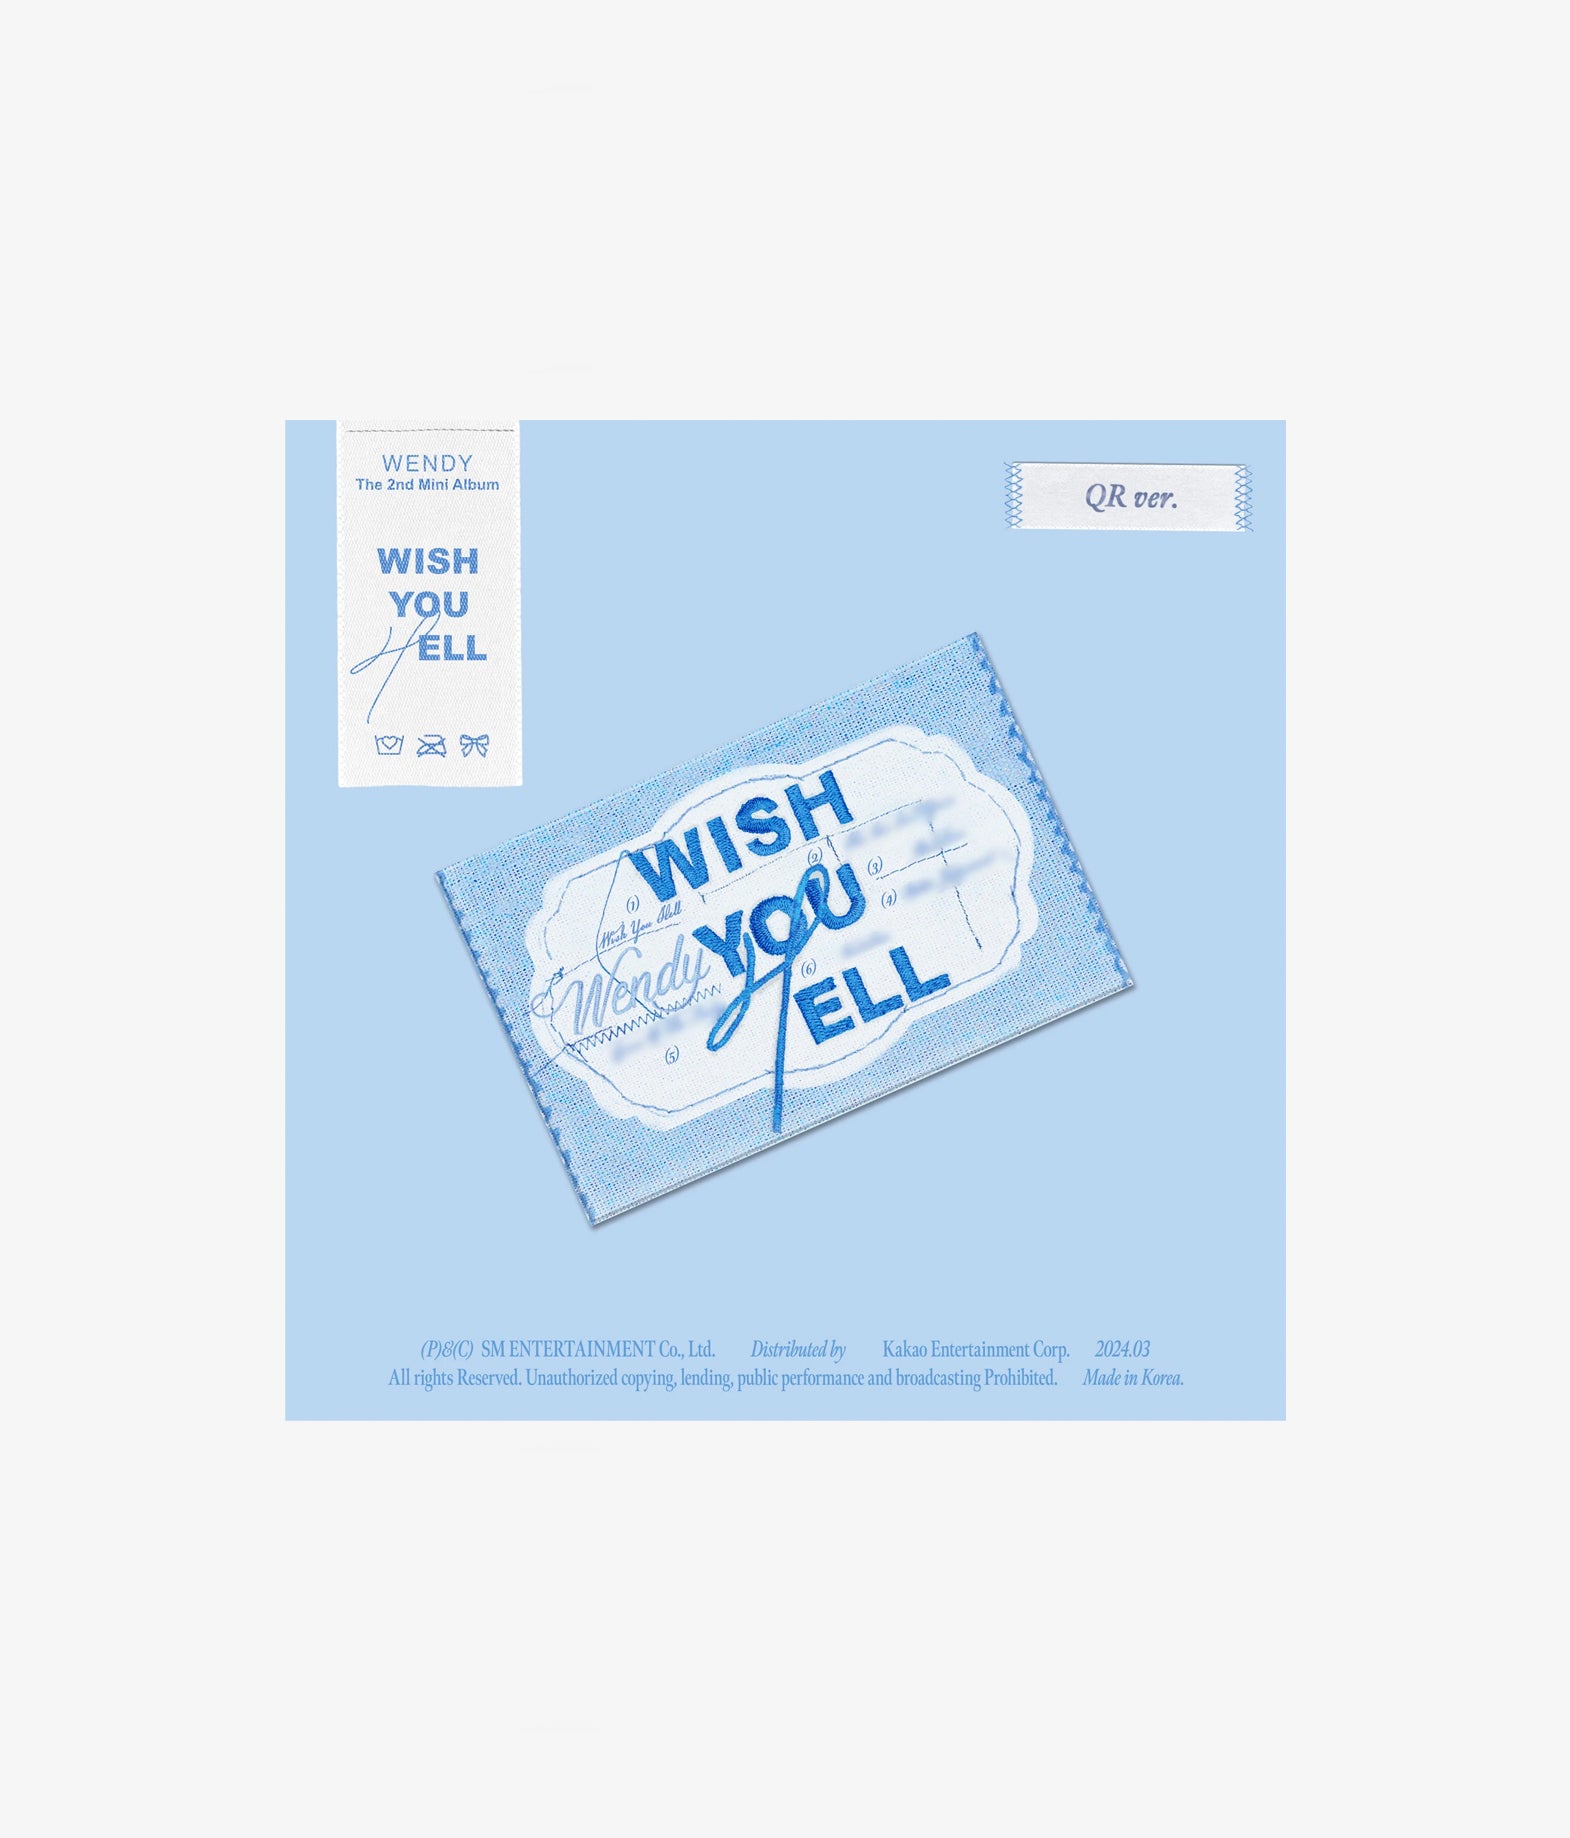 Red Velvet : Wendy - Wish You Hell (QR ver.)